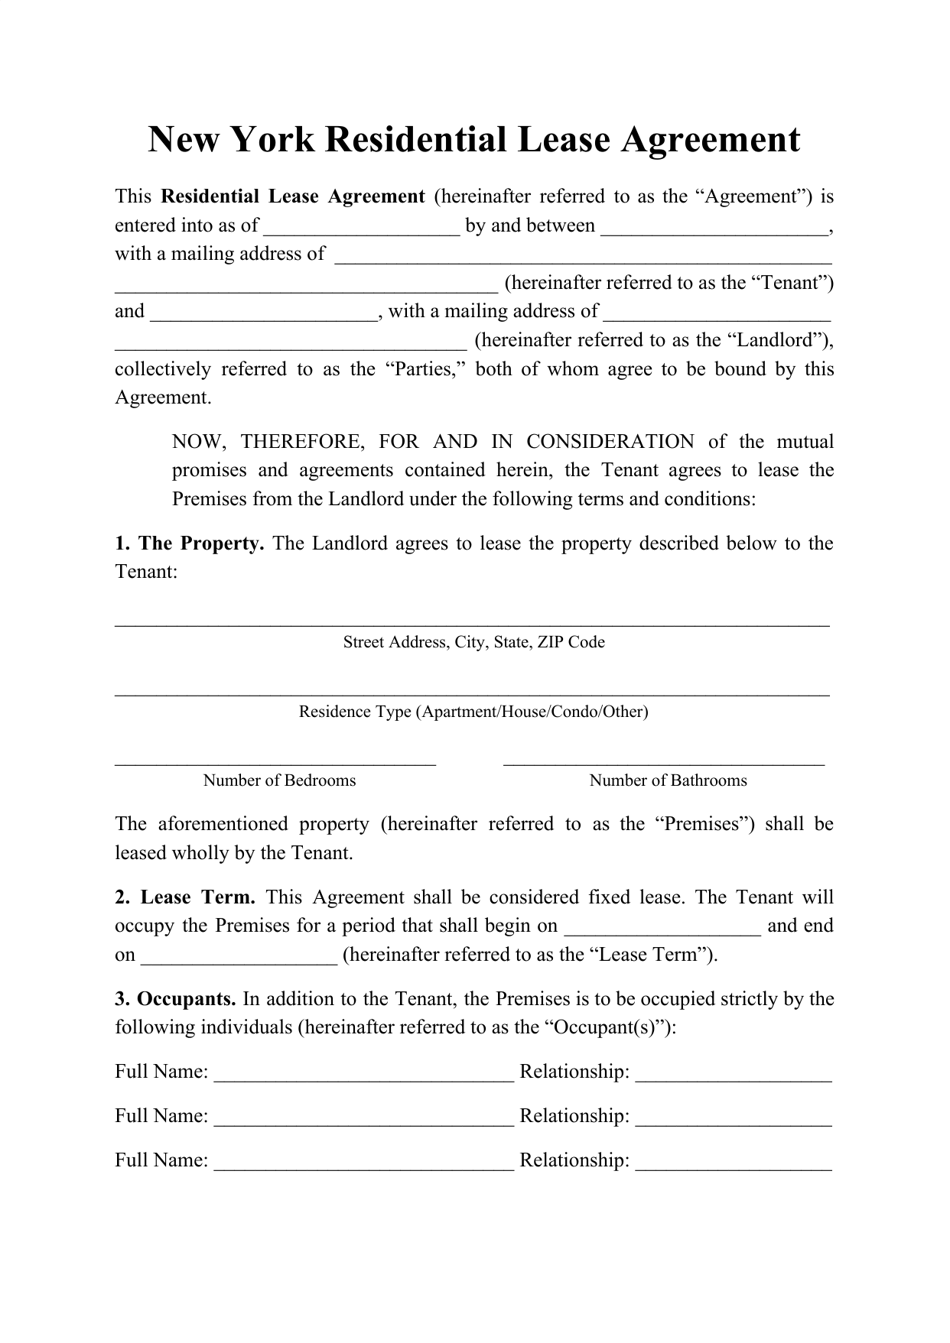 new-york-residential-lease-agreement-template-fill-out-sign-online-and-download-pdf